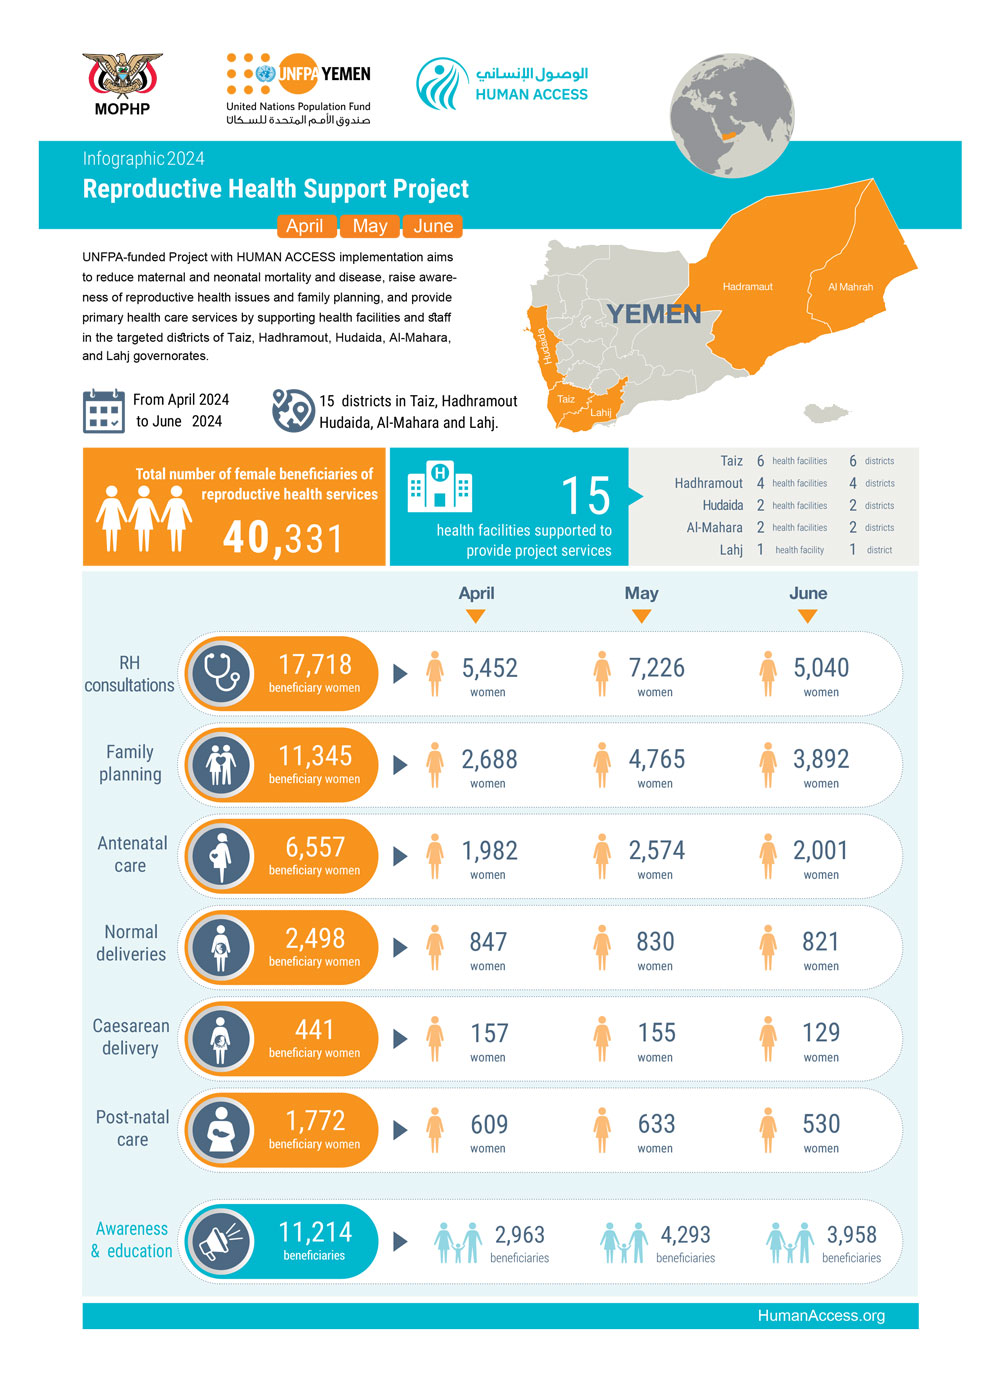 Infographic Reproductive Health Support Project (April - May - June) 2024